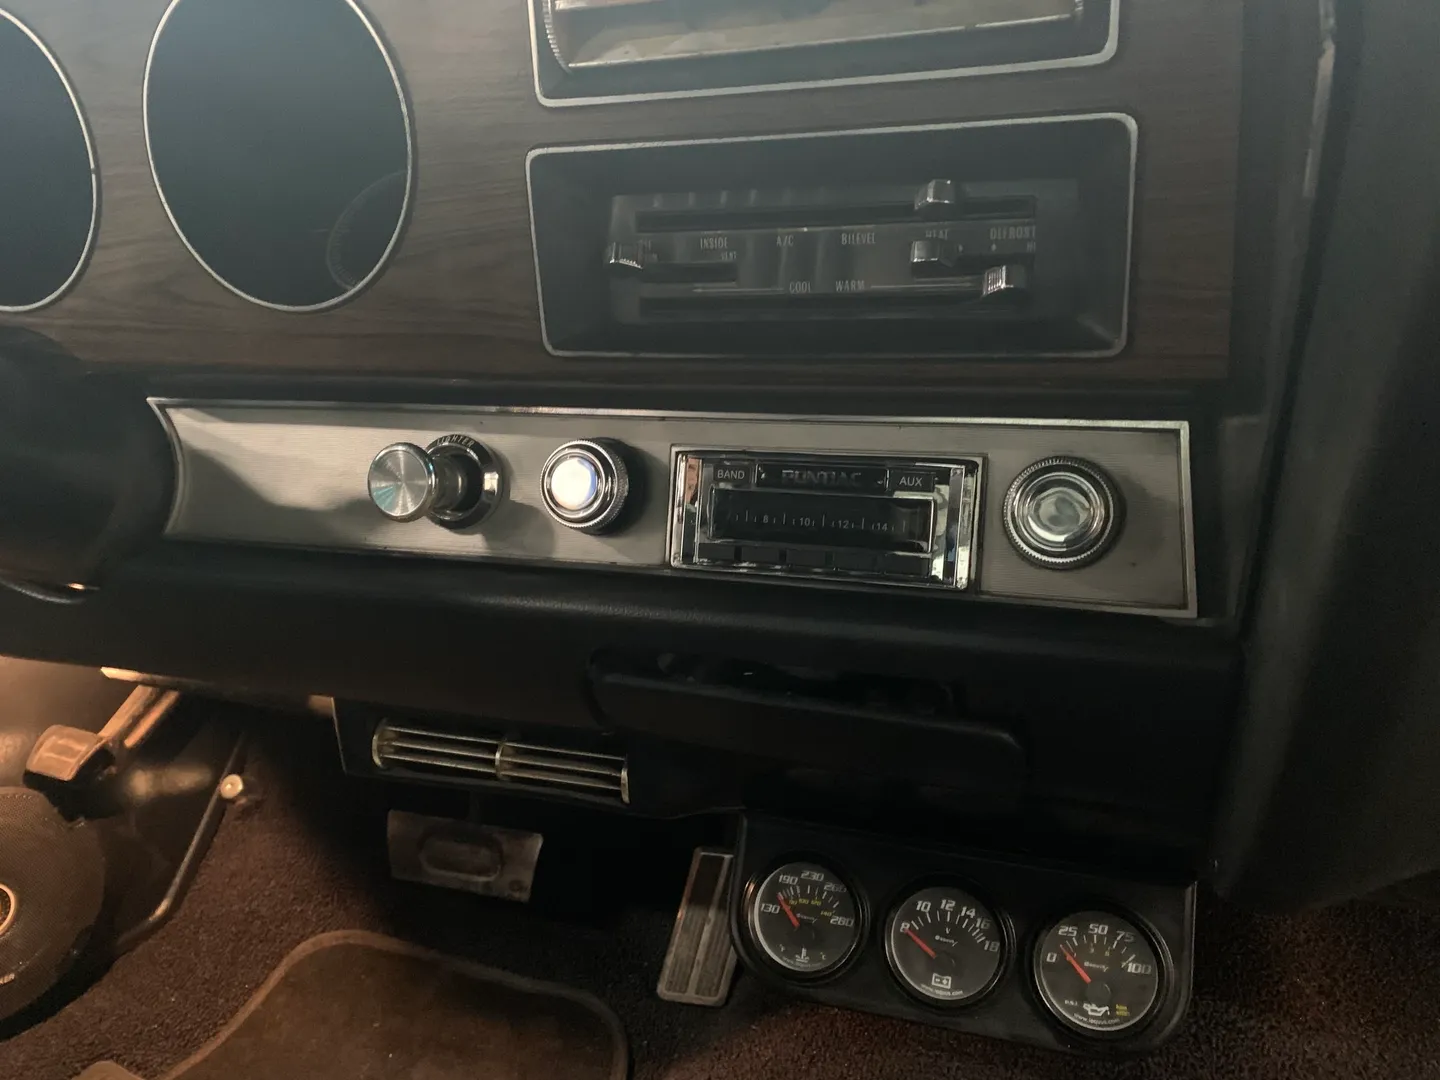 The stereo system of a car at the shop